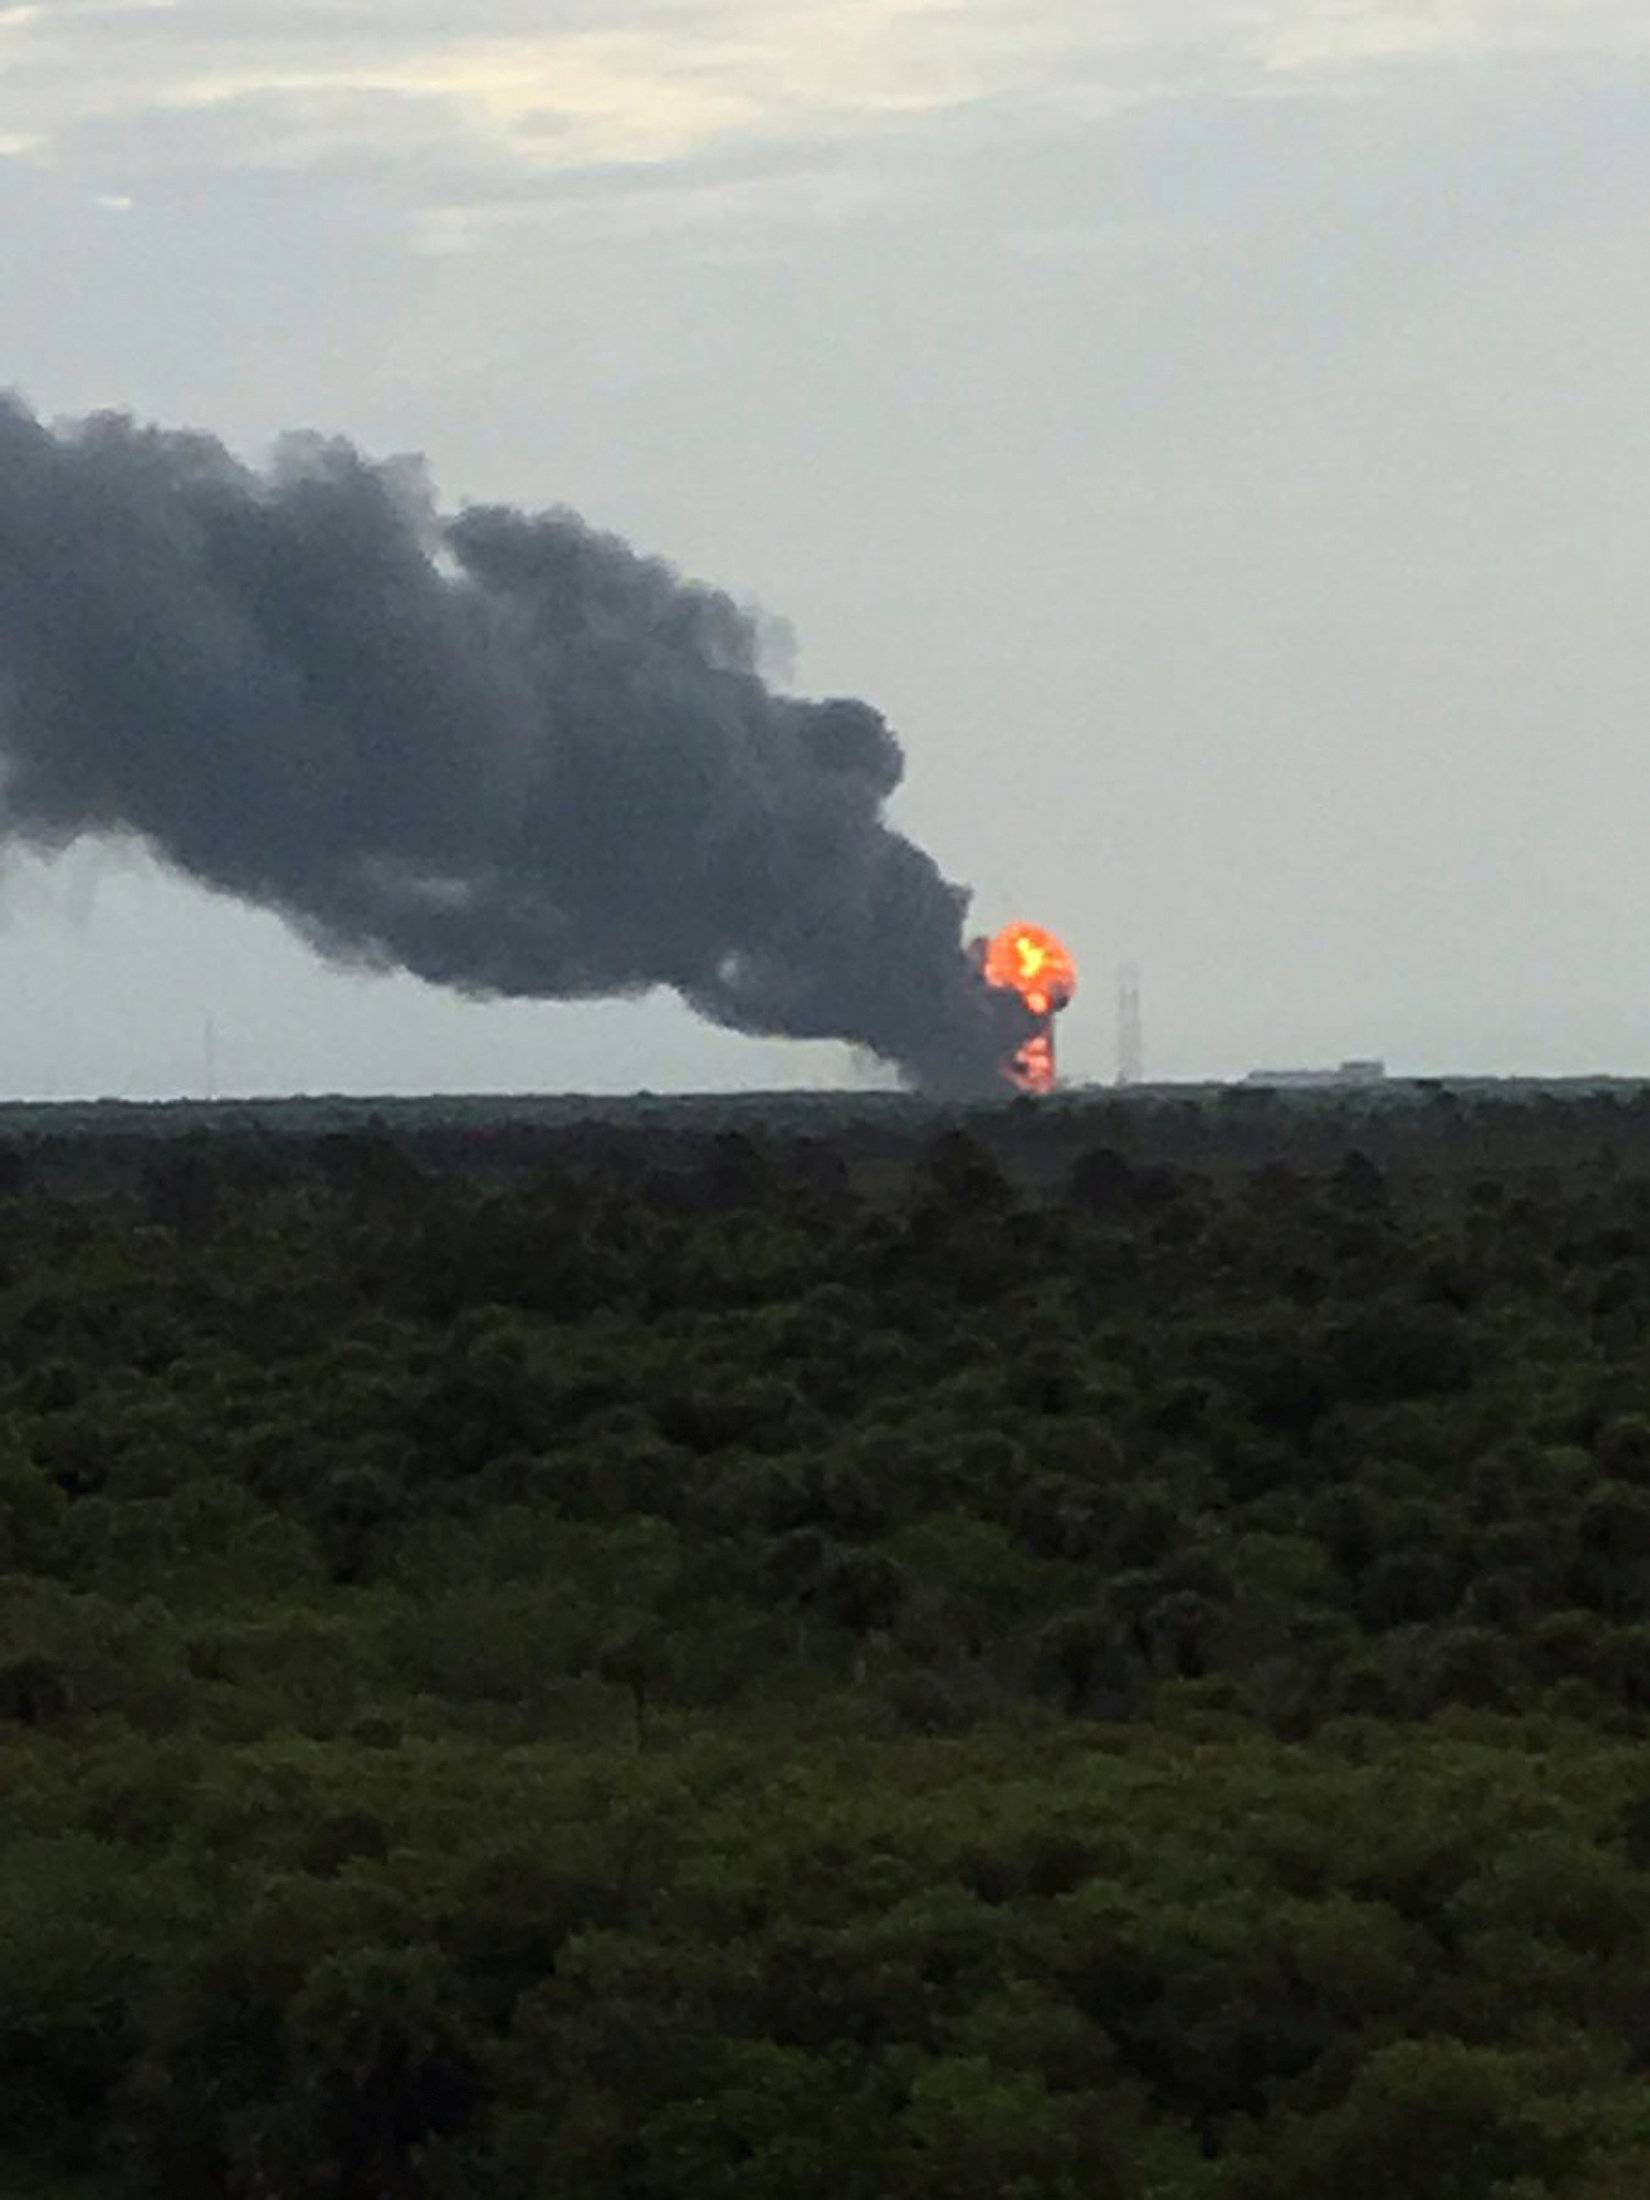 Handout of an explosion on the launch site of a SpaceX Falcon 9 rocket is shown in Cape Canaveral